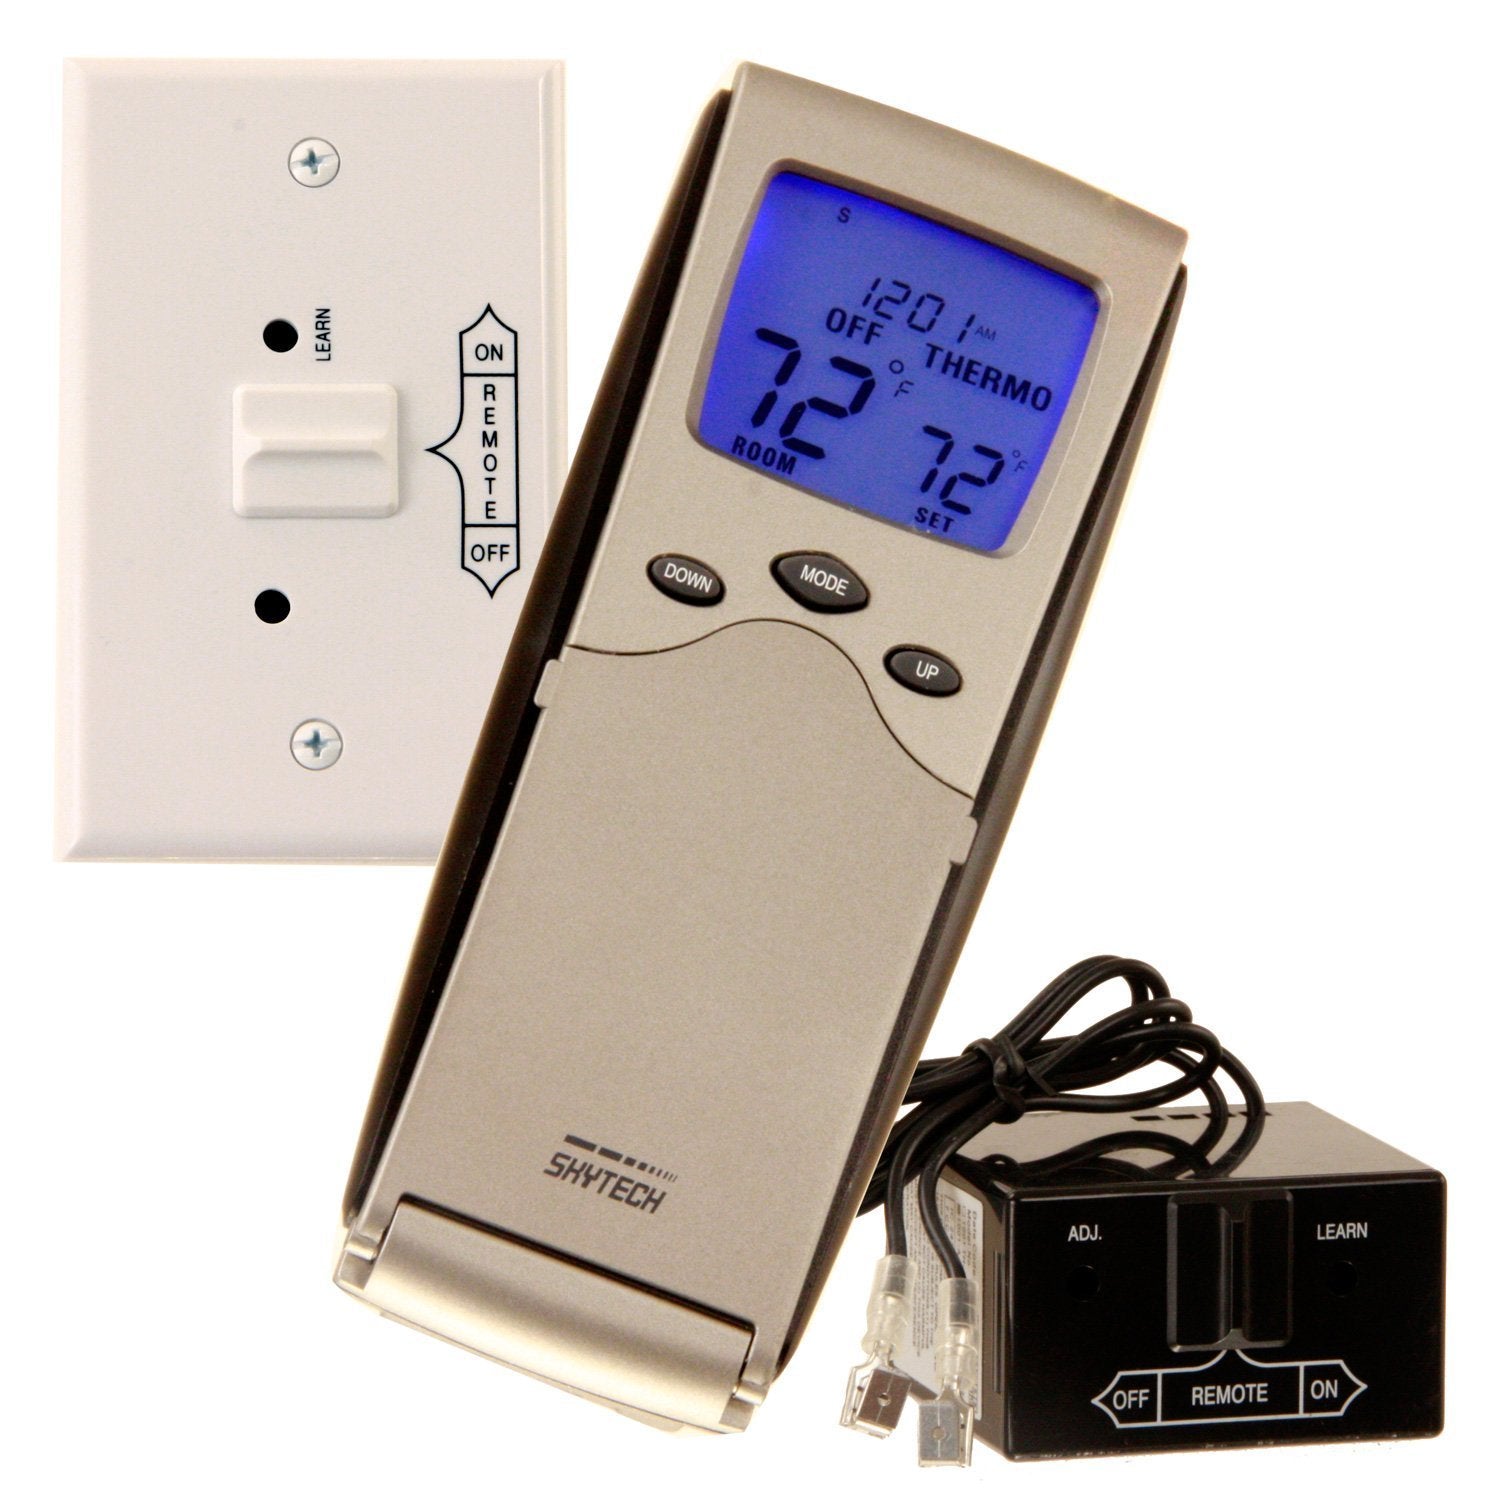 Skytech 5301 Timer/Thermostat Fireplace Remote Control with Backlit Touch  Screen